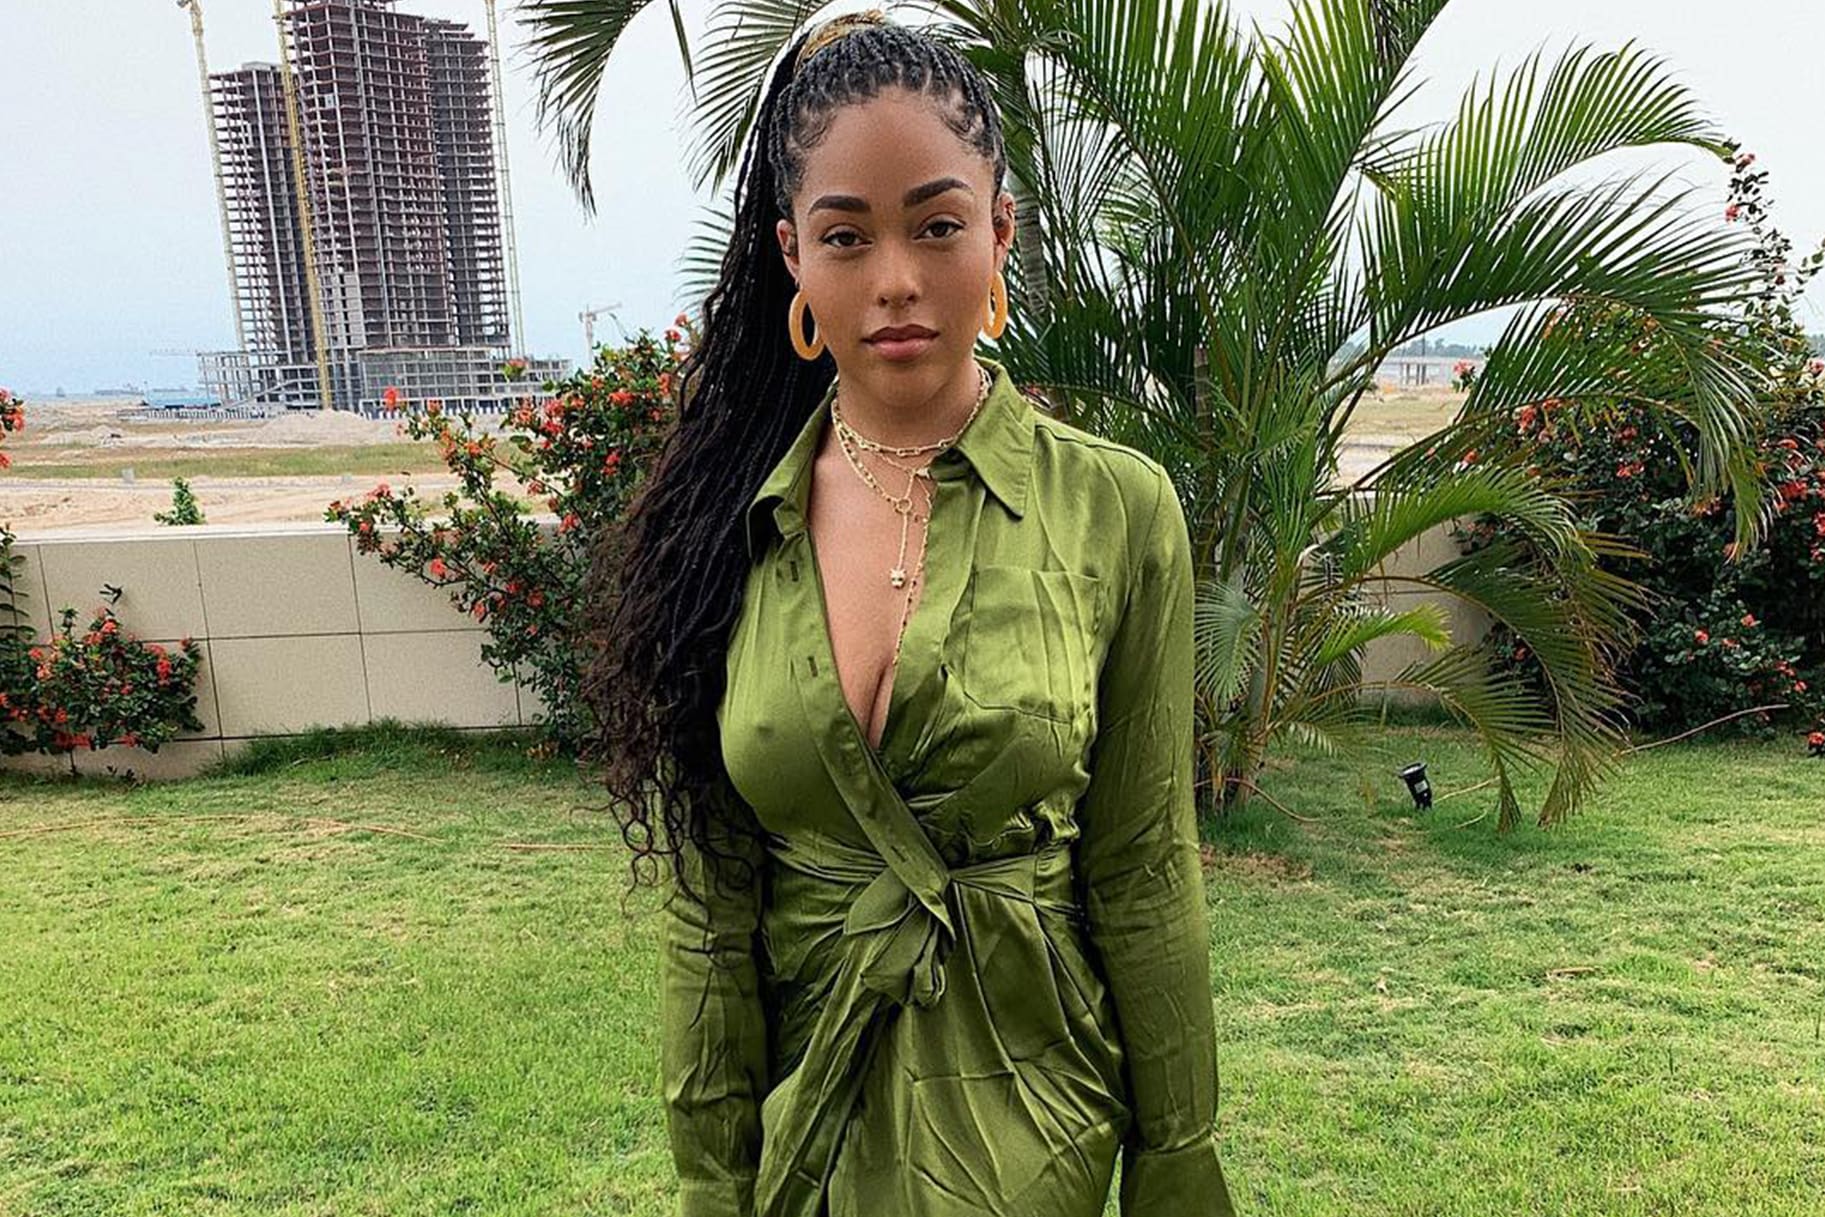 Jordyn Woods Is Twinning With Her Sister, Jodie In These Latest Photos